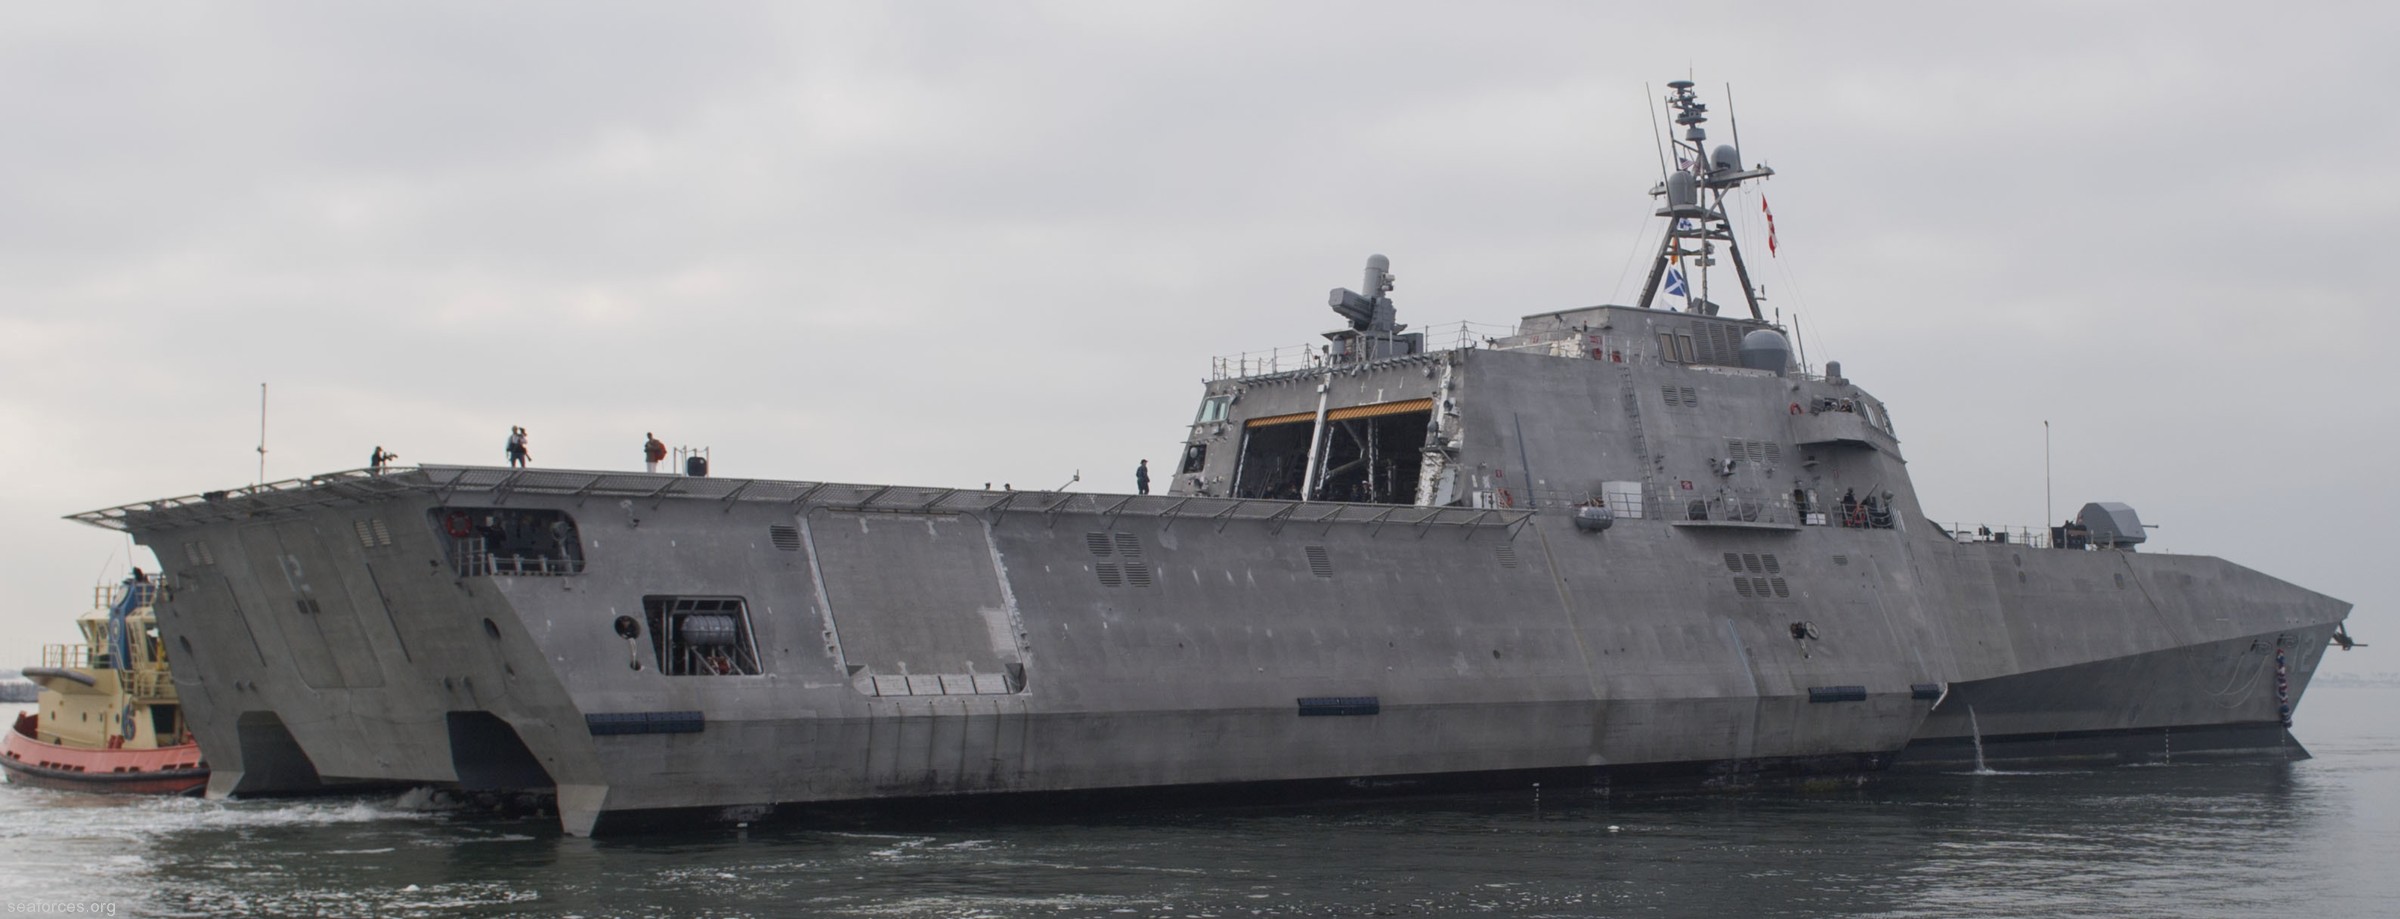 lcs-12 uss omaha independence class littoral combat ship us navy 07 naval base san diego